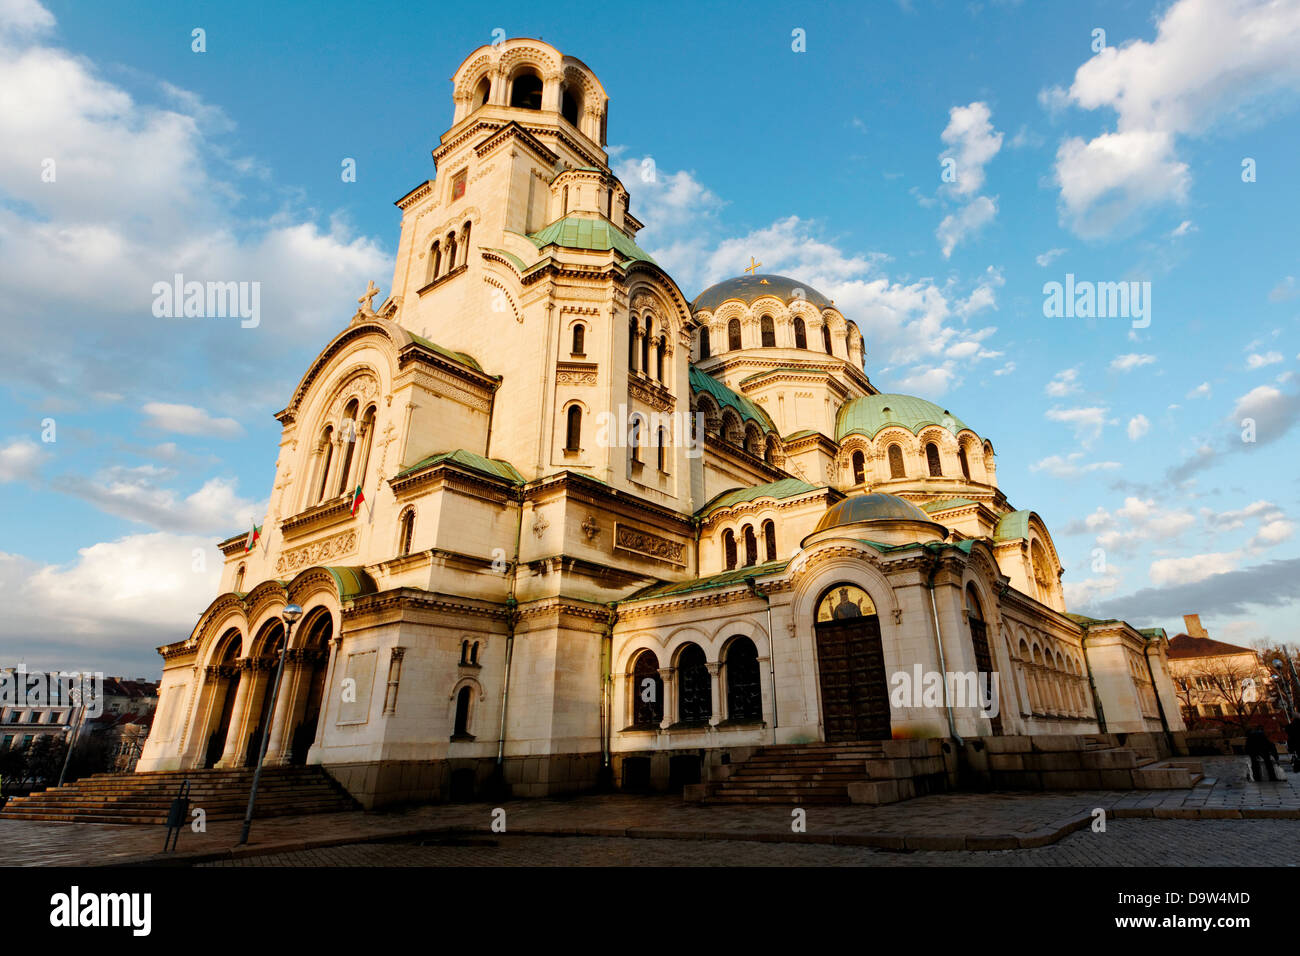 Alexandr Nevski Cathedral in Sofia, Bulgaria, with its golden domes Stock Photo